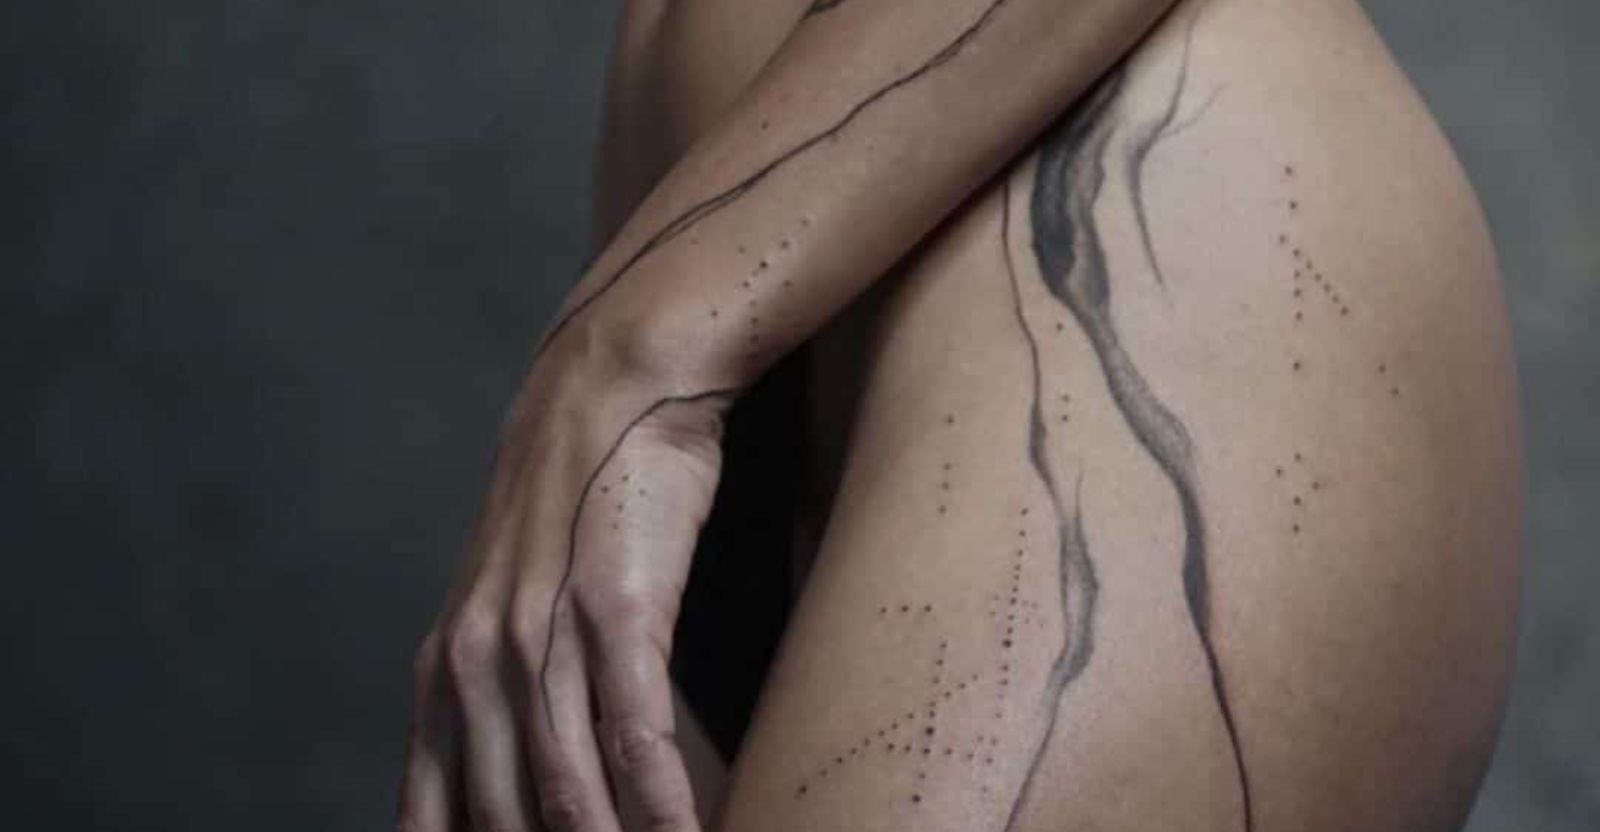 Covadobra Abstract lines Scars... - ADAMA - tattoo & art | Facebook